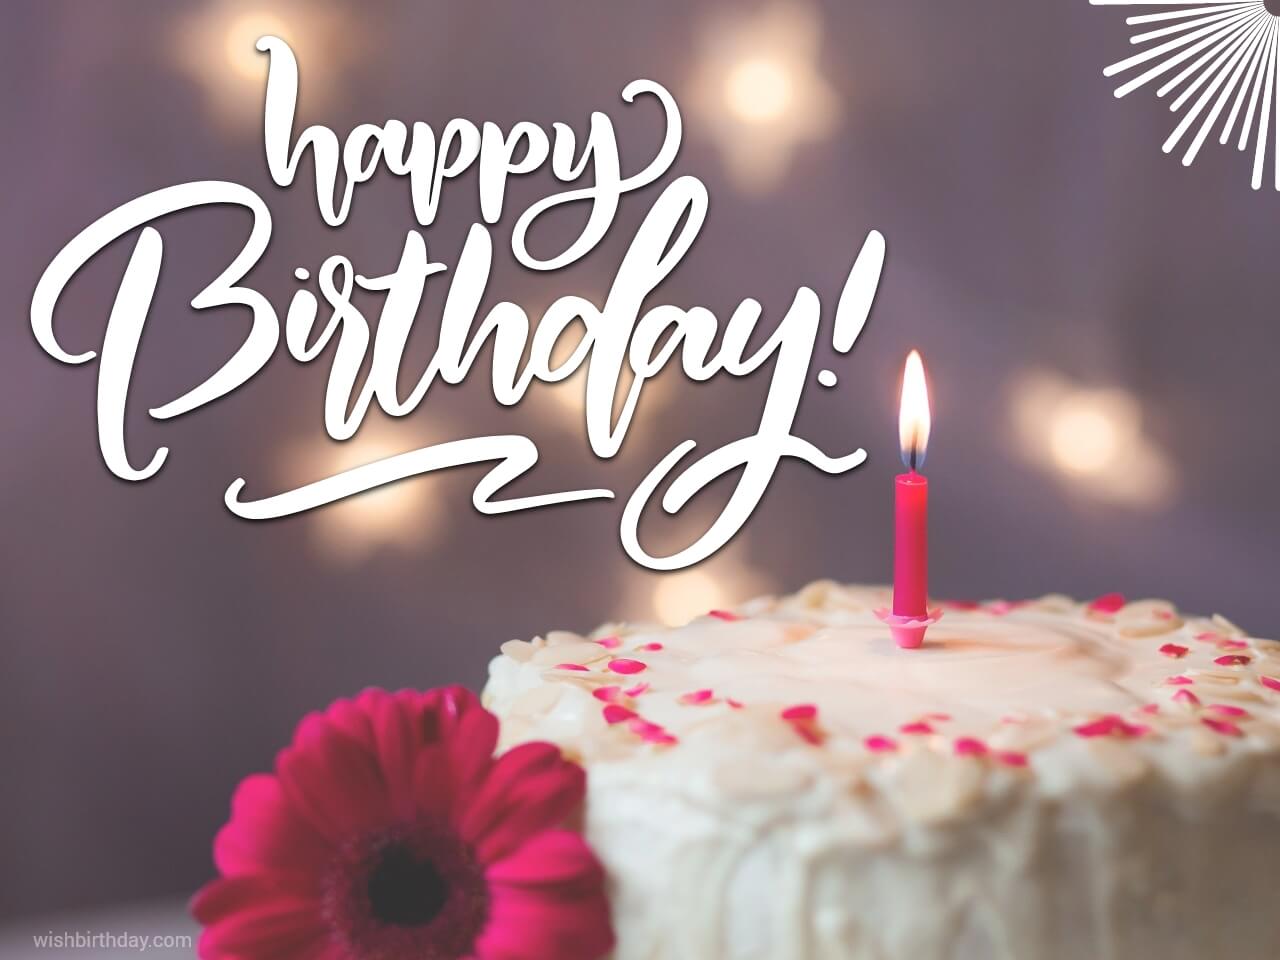 Collection of Amazing Full 4K Birthday Cake Wishes Images: 999+ Top Picks